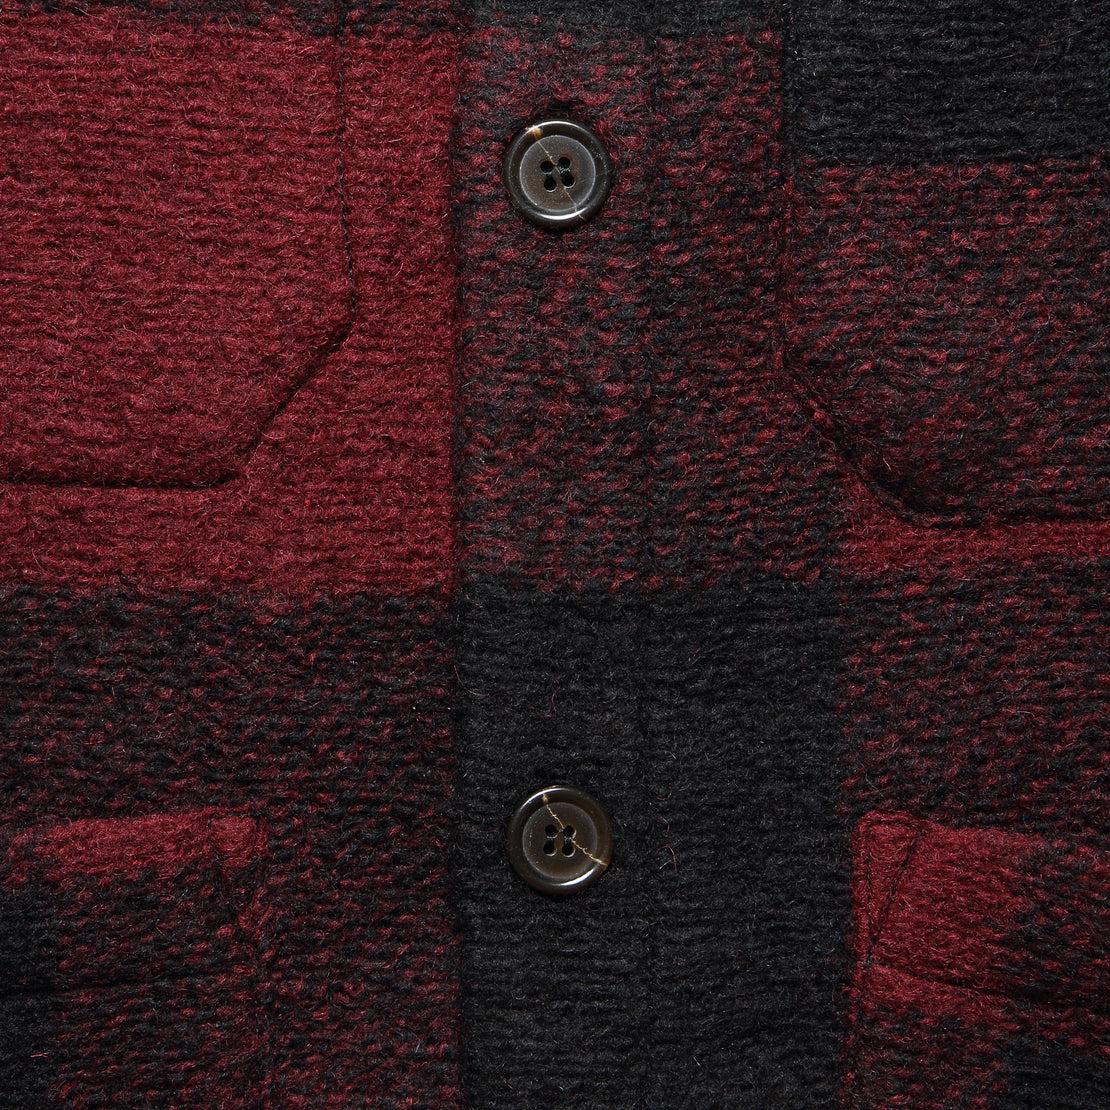 Wool Fleece Cardigan - Red Check - Universal Works - STAG Provisions - Tops - Sweater